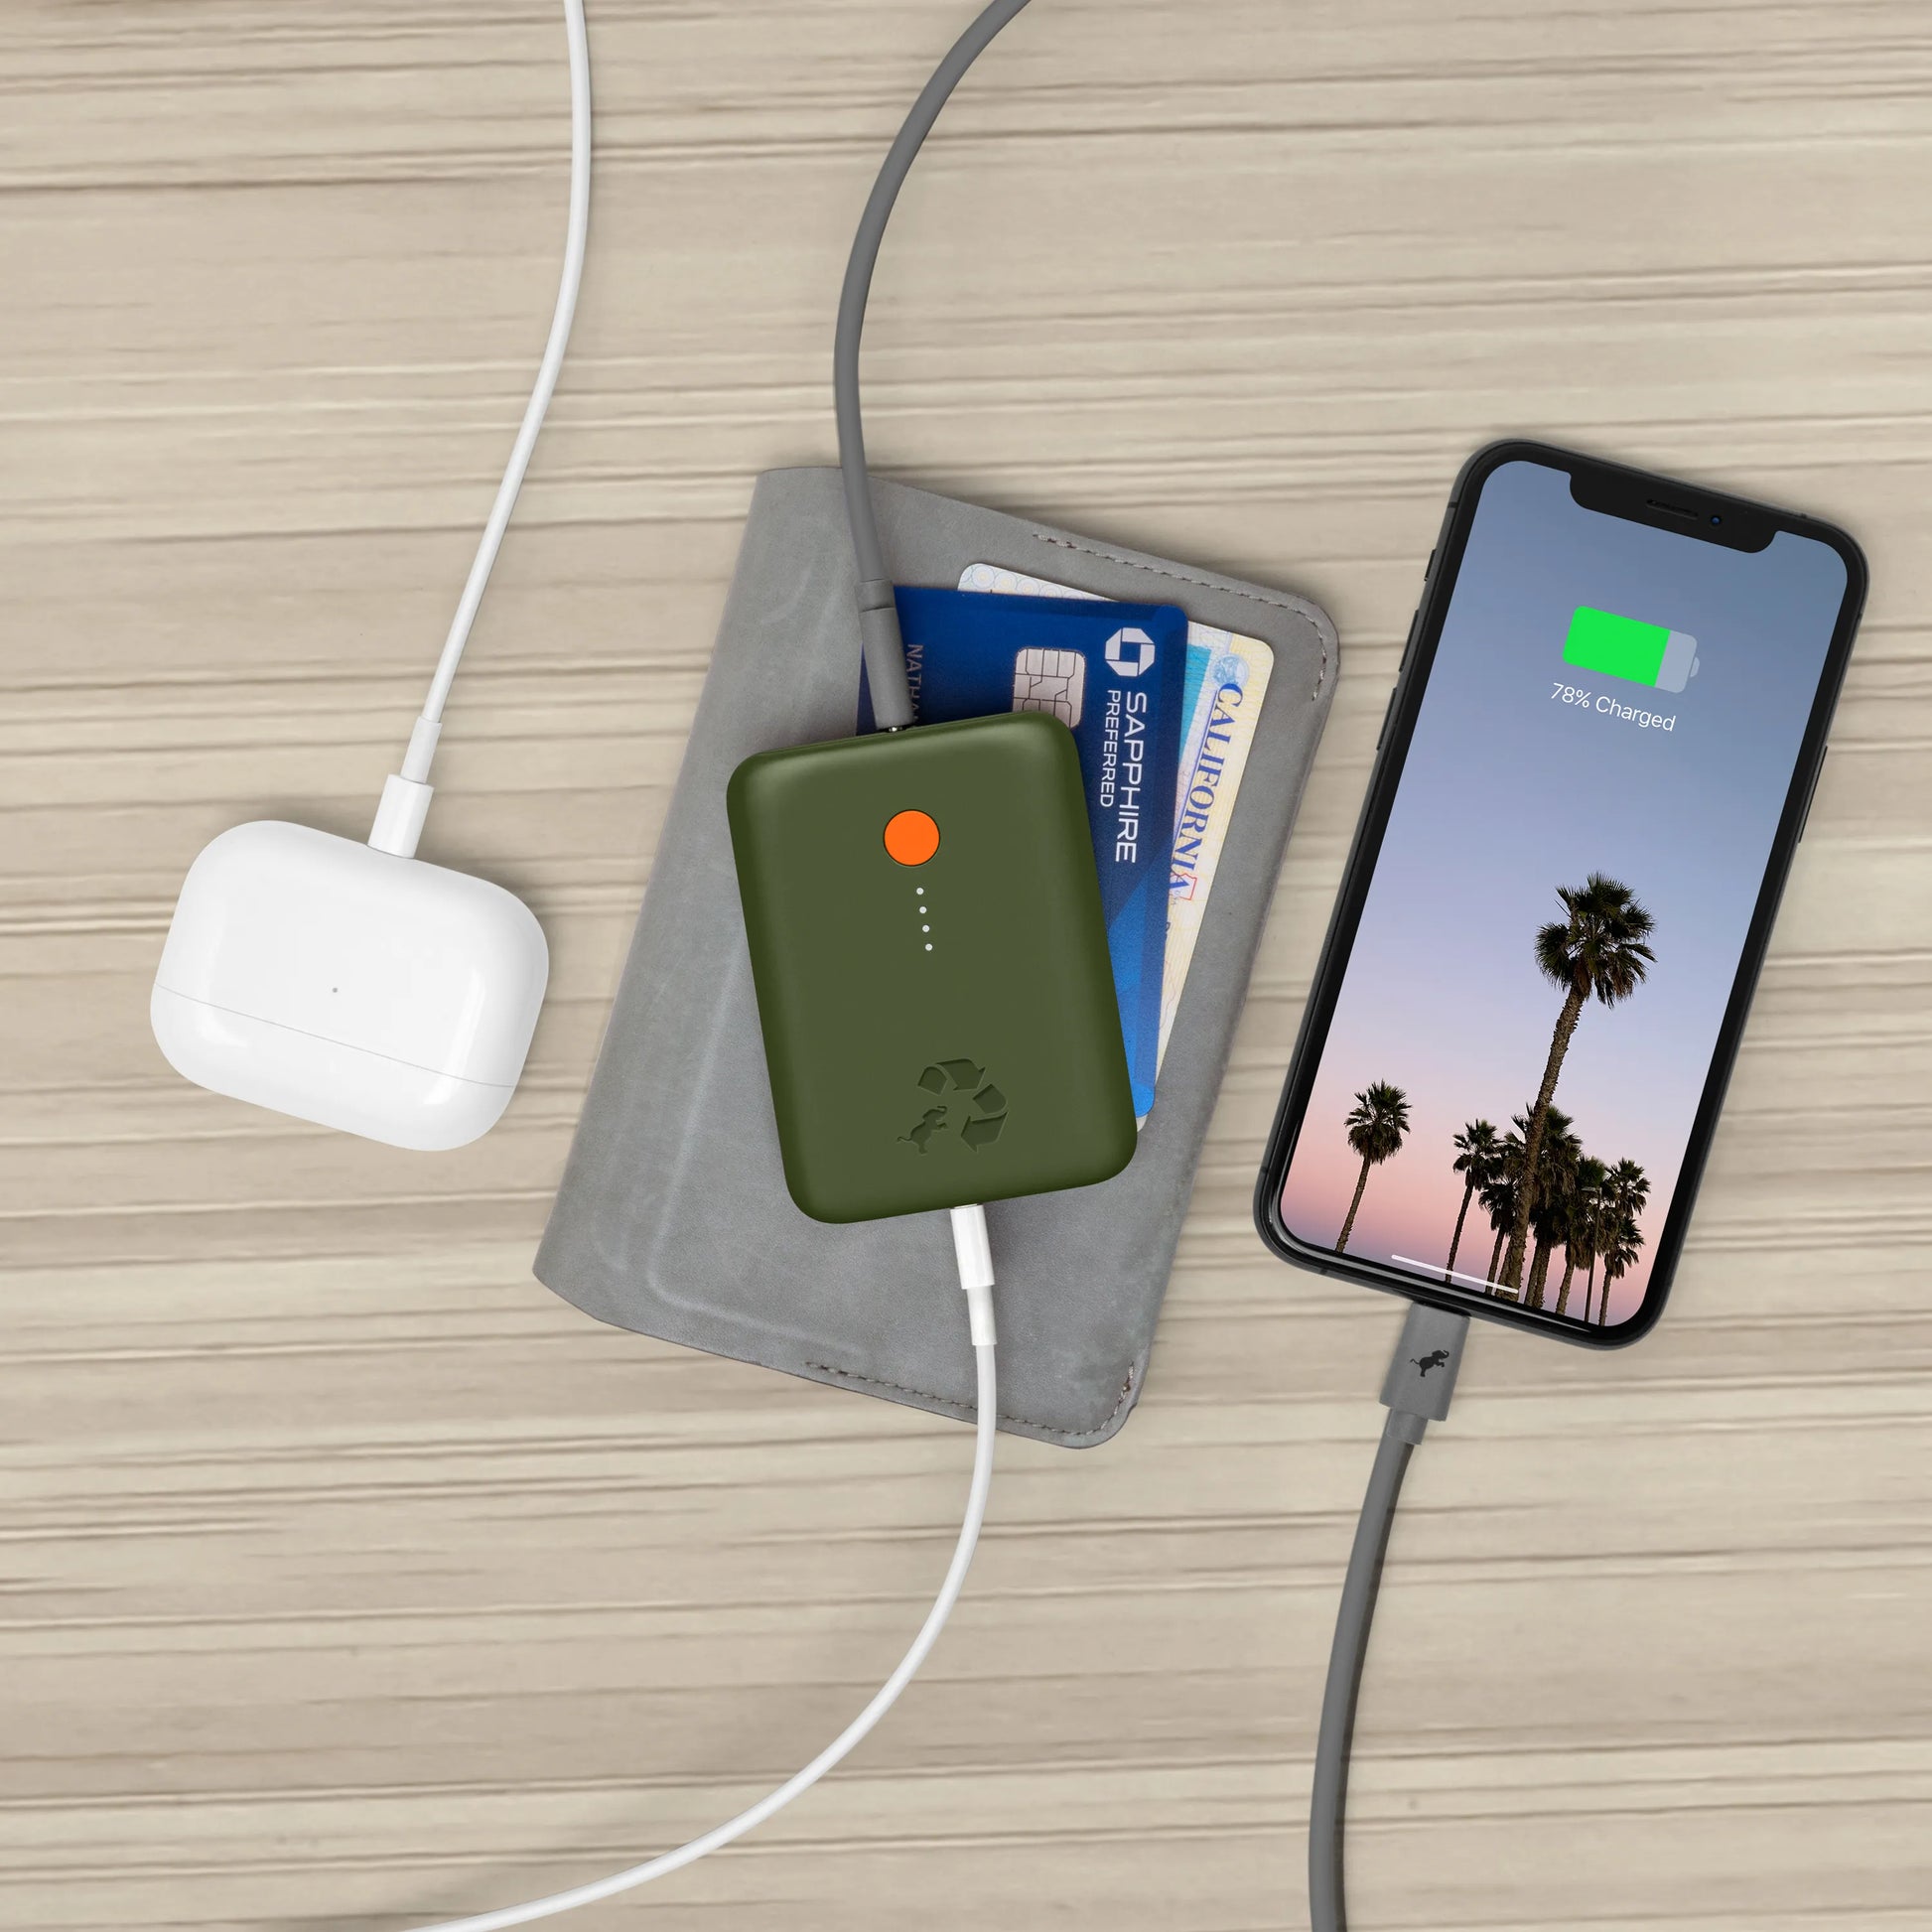 Green portable charger with orange button connected to airpods and cell phone.